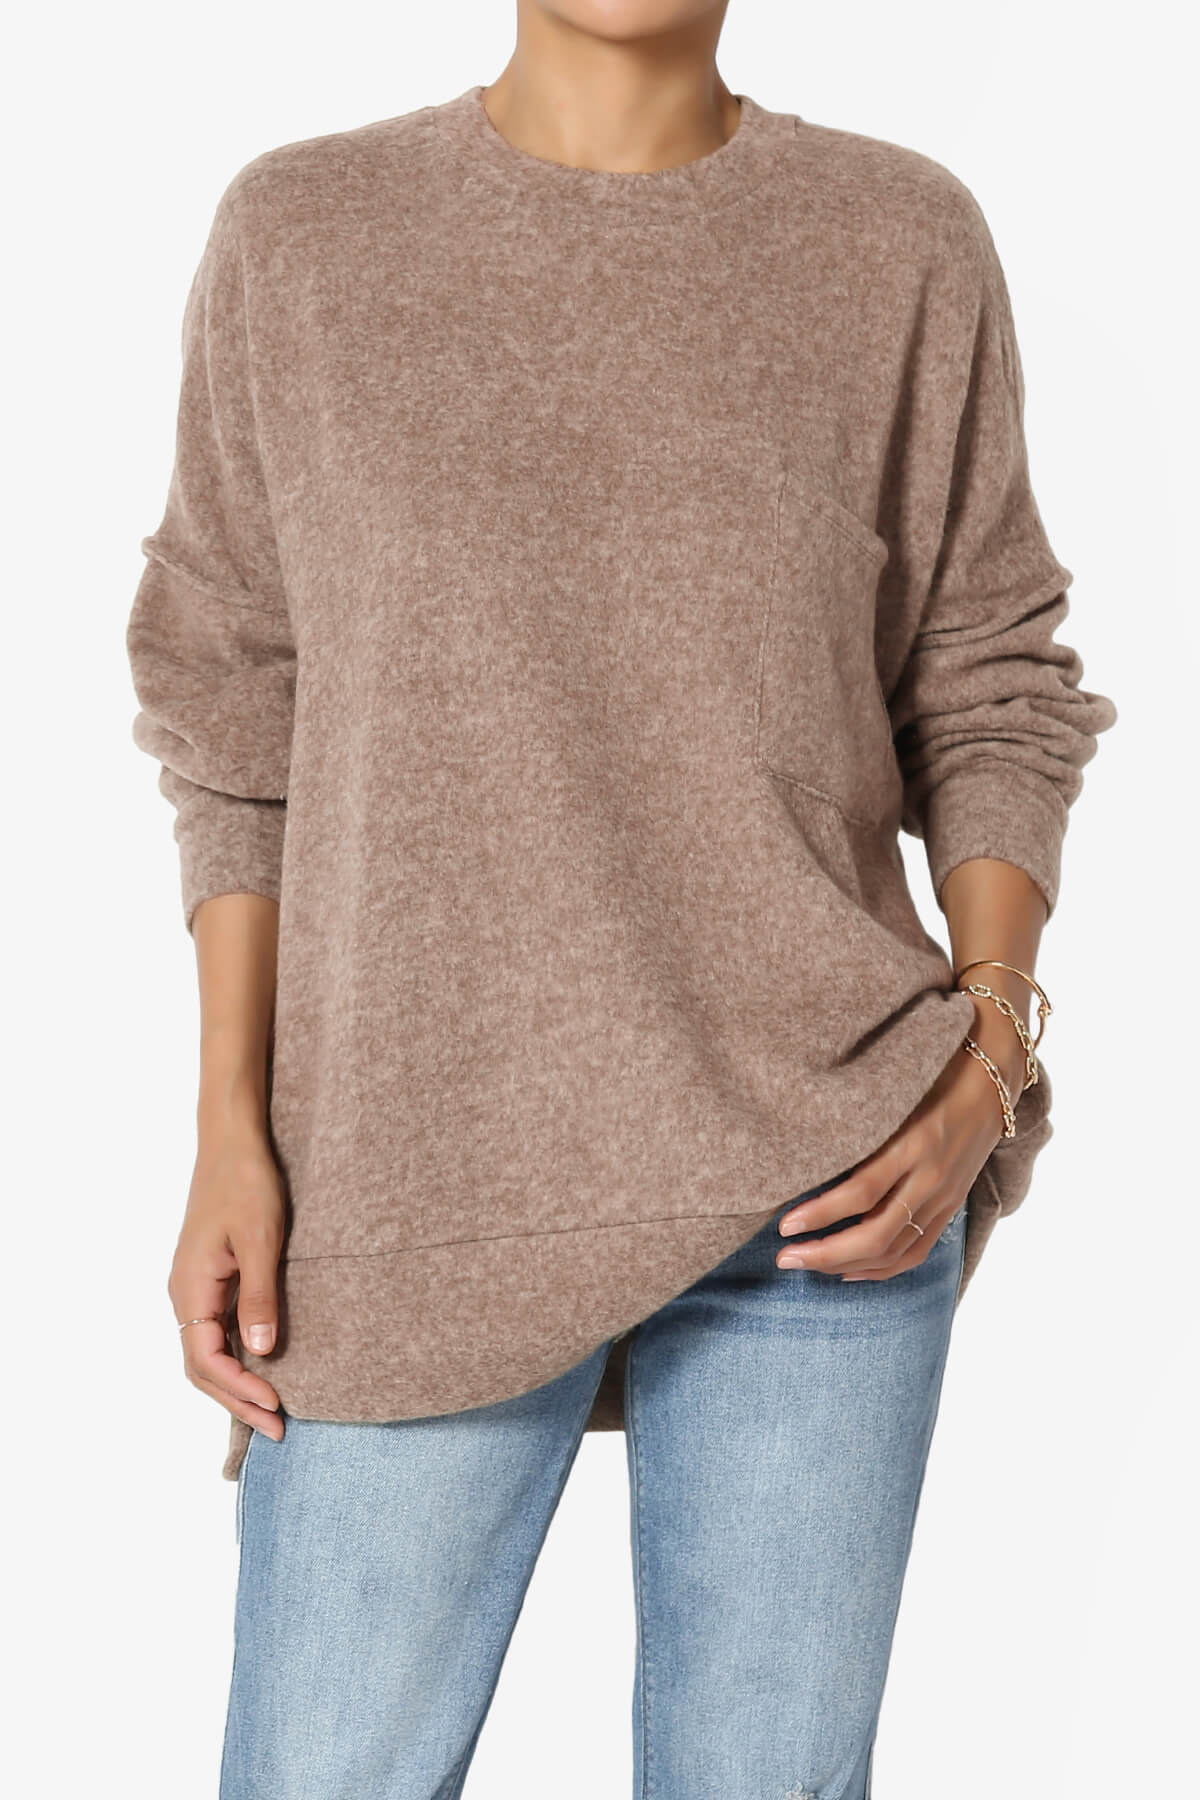 Load image into Gallery viewer, Breccan Blushed Knit Oversized Sweater MOCHA_1
